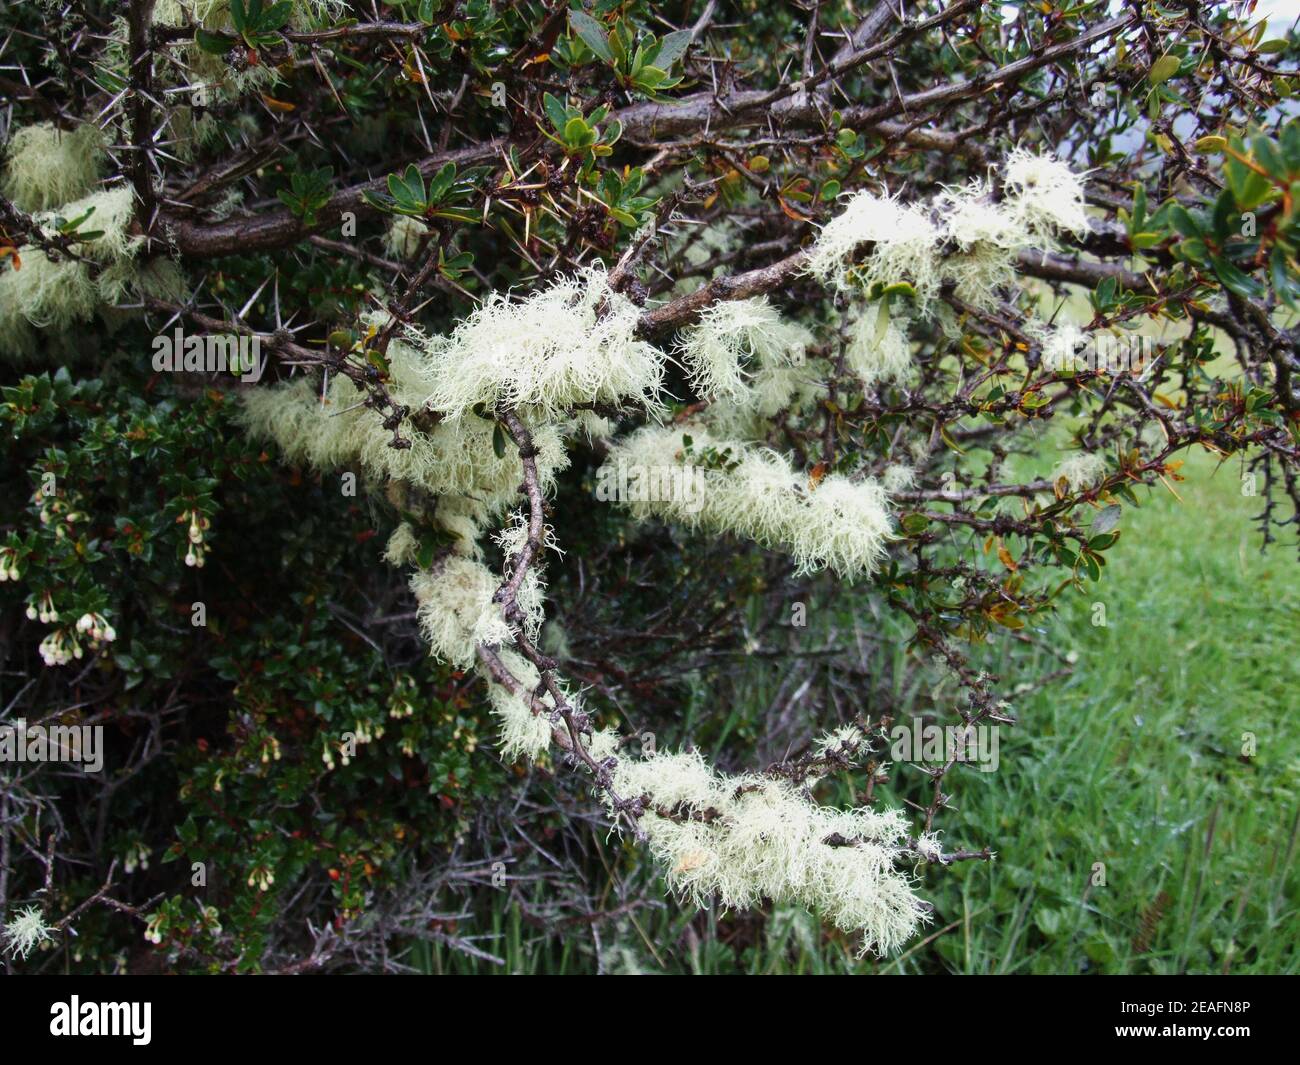 Lichen on branches in Tierra del Fuego National Park, Argentina  Stock Photo